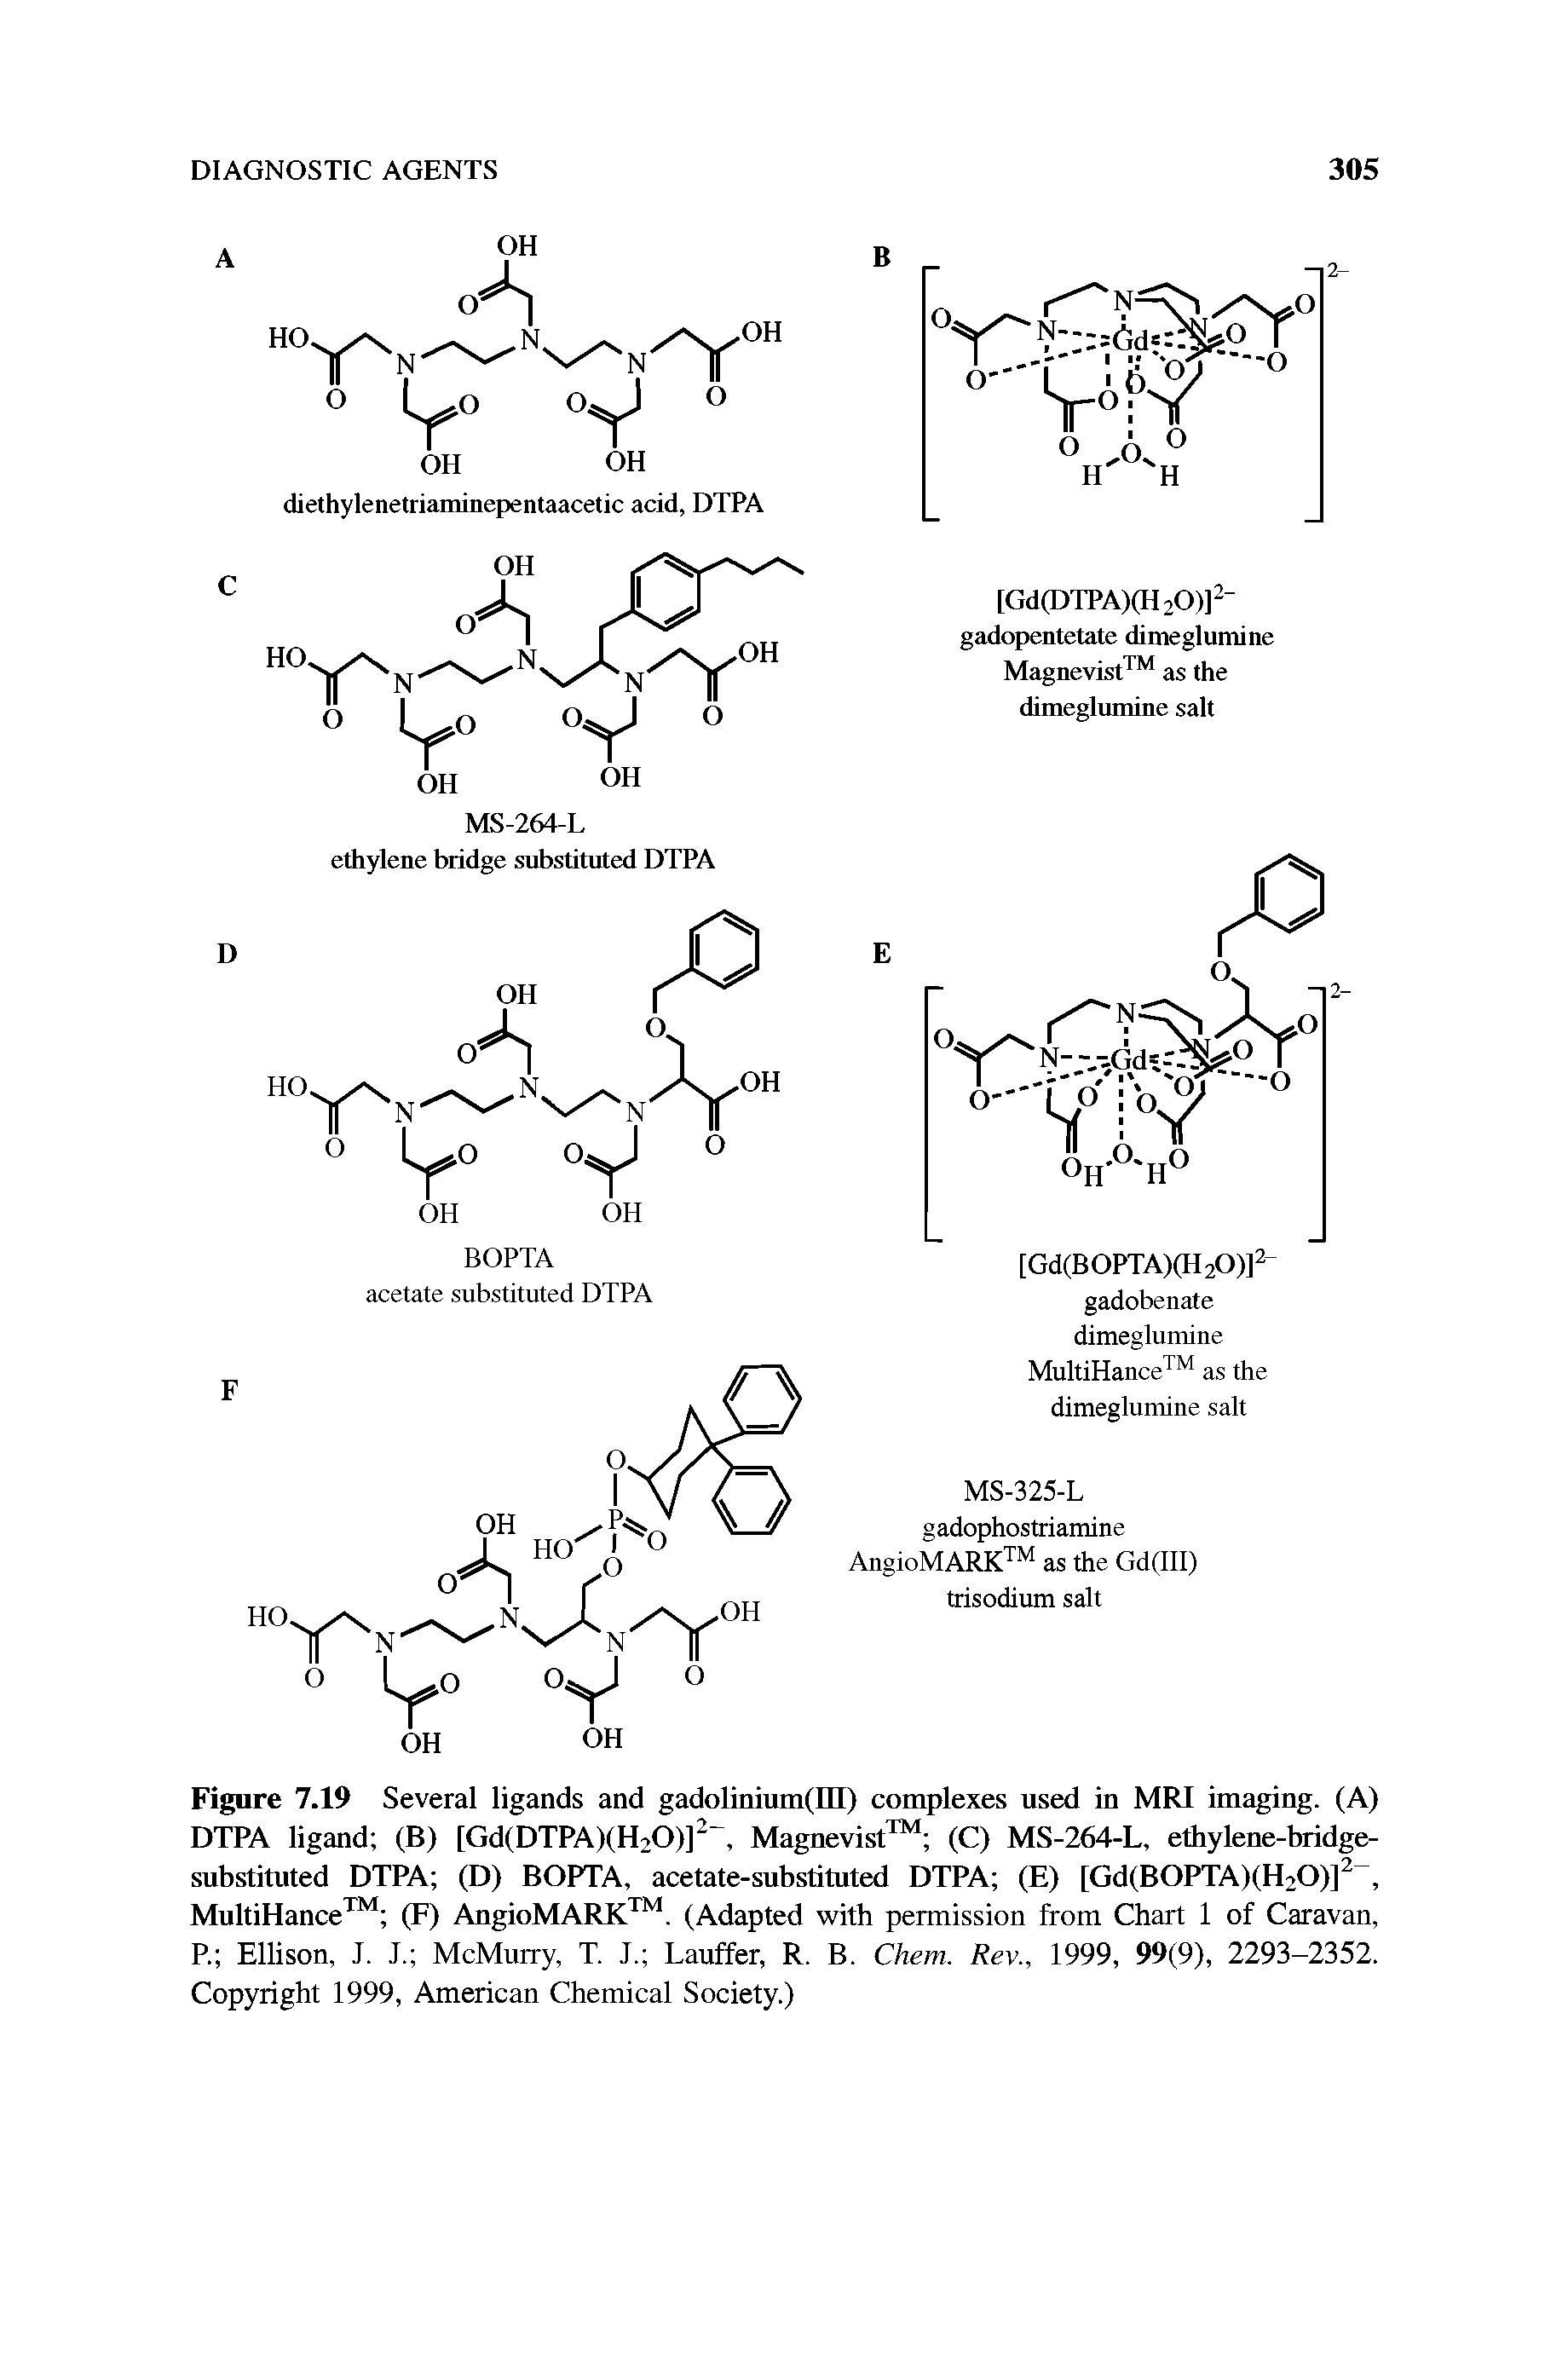 Figure 7.19 Several ligands and gadolinium(III) complexes used in MRI imaging. (A) DTPA ligand (B) [Gd(DTPA)(H20)]2, Magnevist (C) MS-264-L, ethylene-bridge-substituted DTPA (D) BOPTA, acetate-substituted DTPA (E) [Gd(B0PTA)(H20)]2, MultiHance (F) AngioMARK . (Adapted with permission from Chart 1 of Caravan, P. Ellison, J. J. McMurry, T. J. Lauffer, R. B. Chem. Rev., 1999, 99(9), 2293-2352. Copyright 1999, American Chemical Society.)...